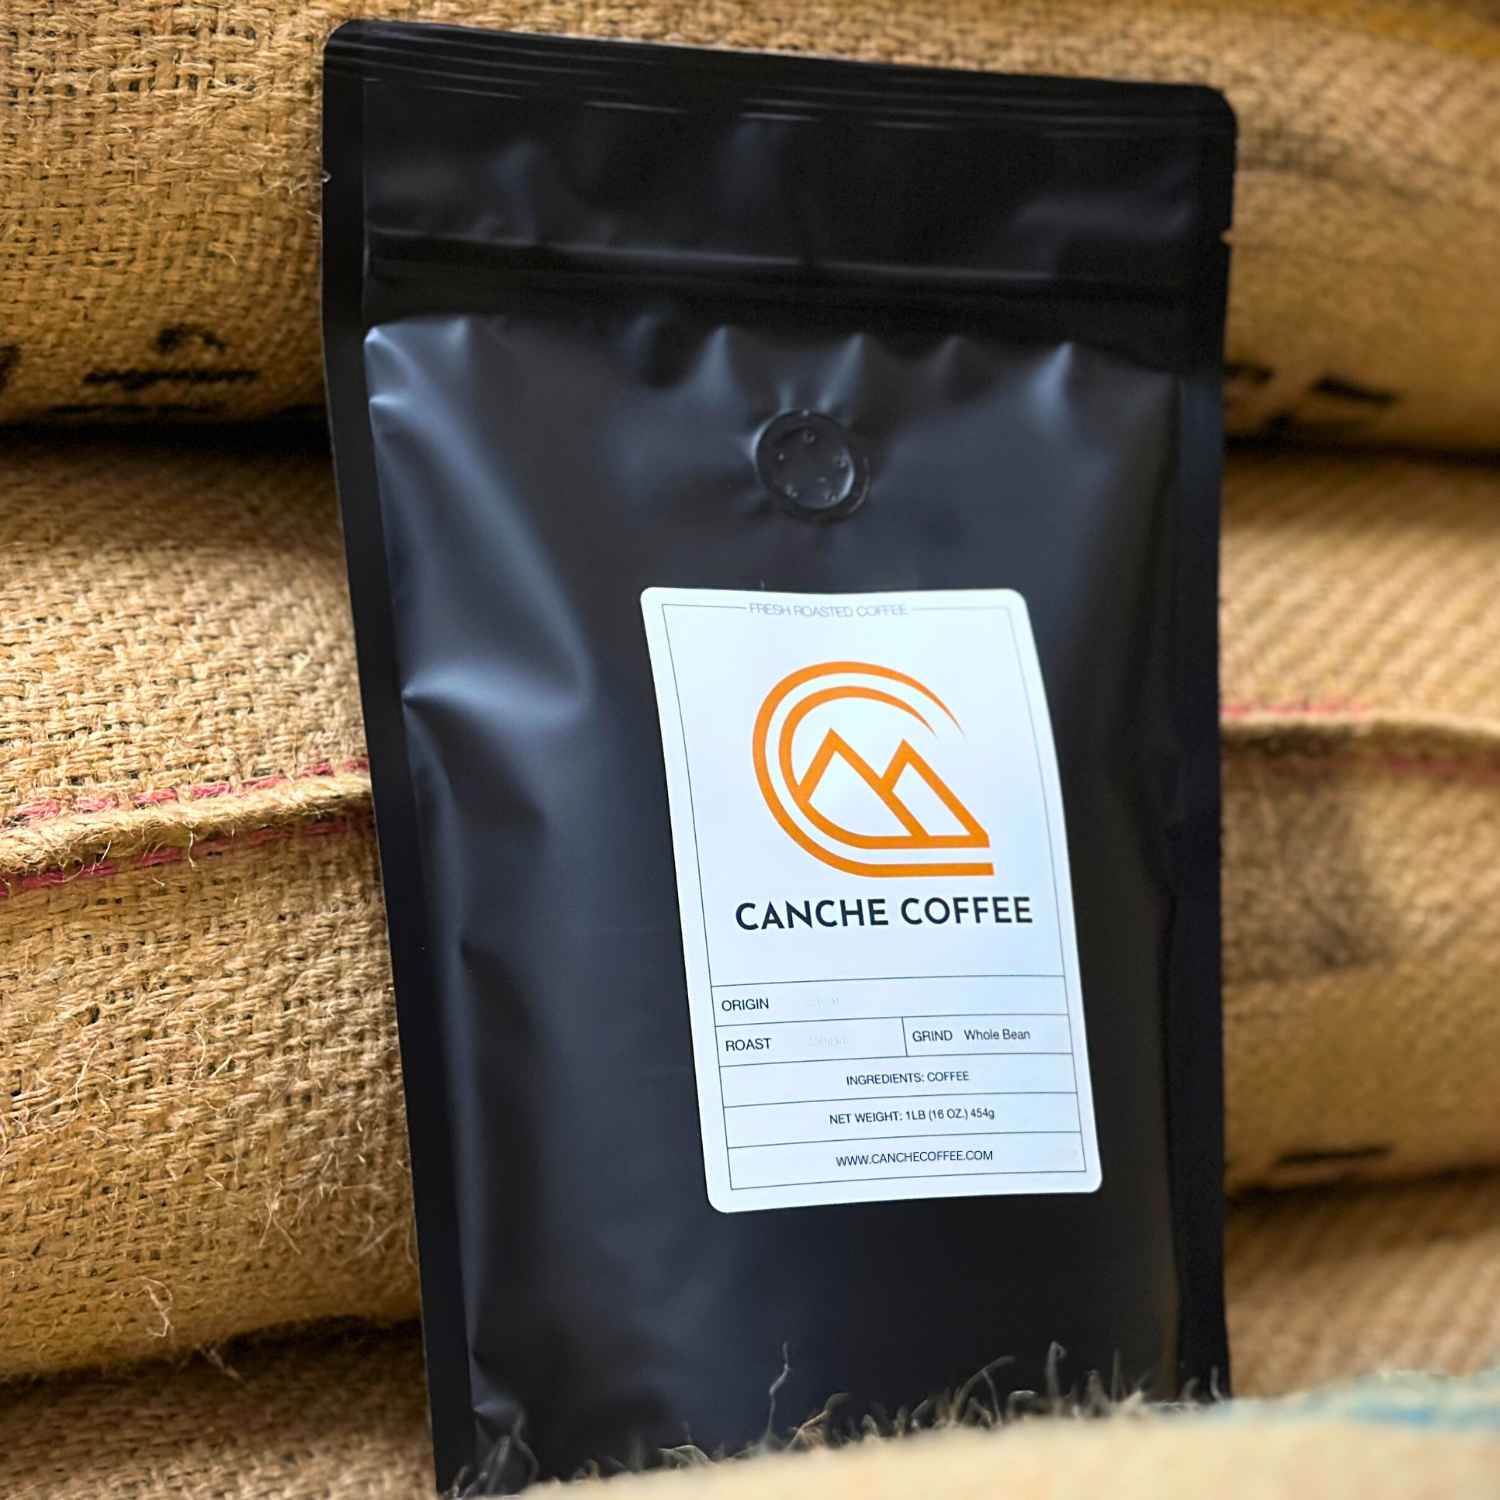 Latin American Blend - Canche Coffee